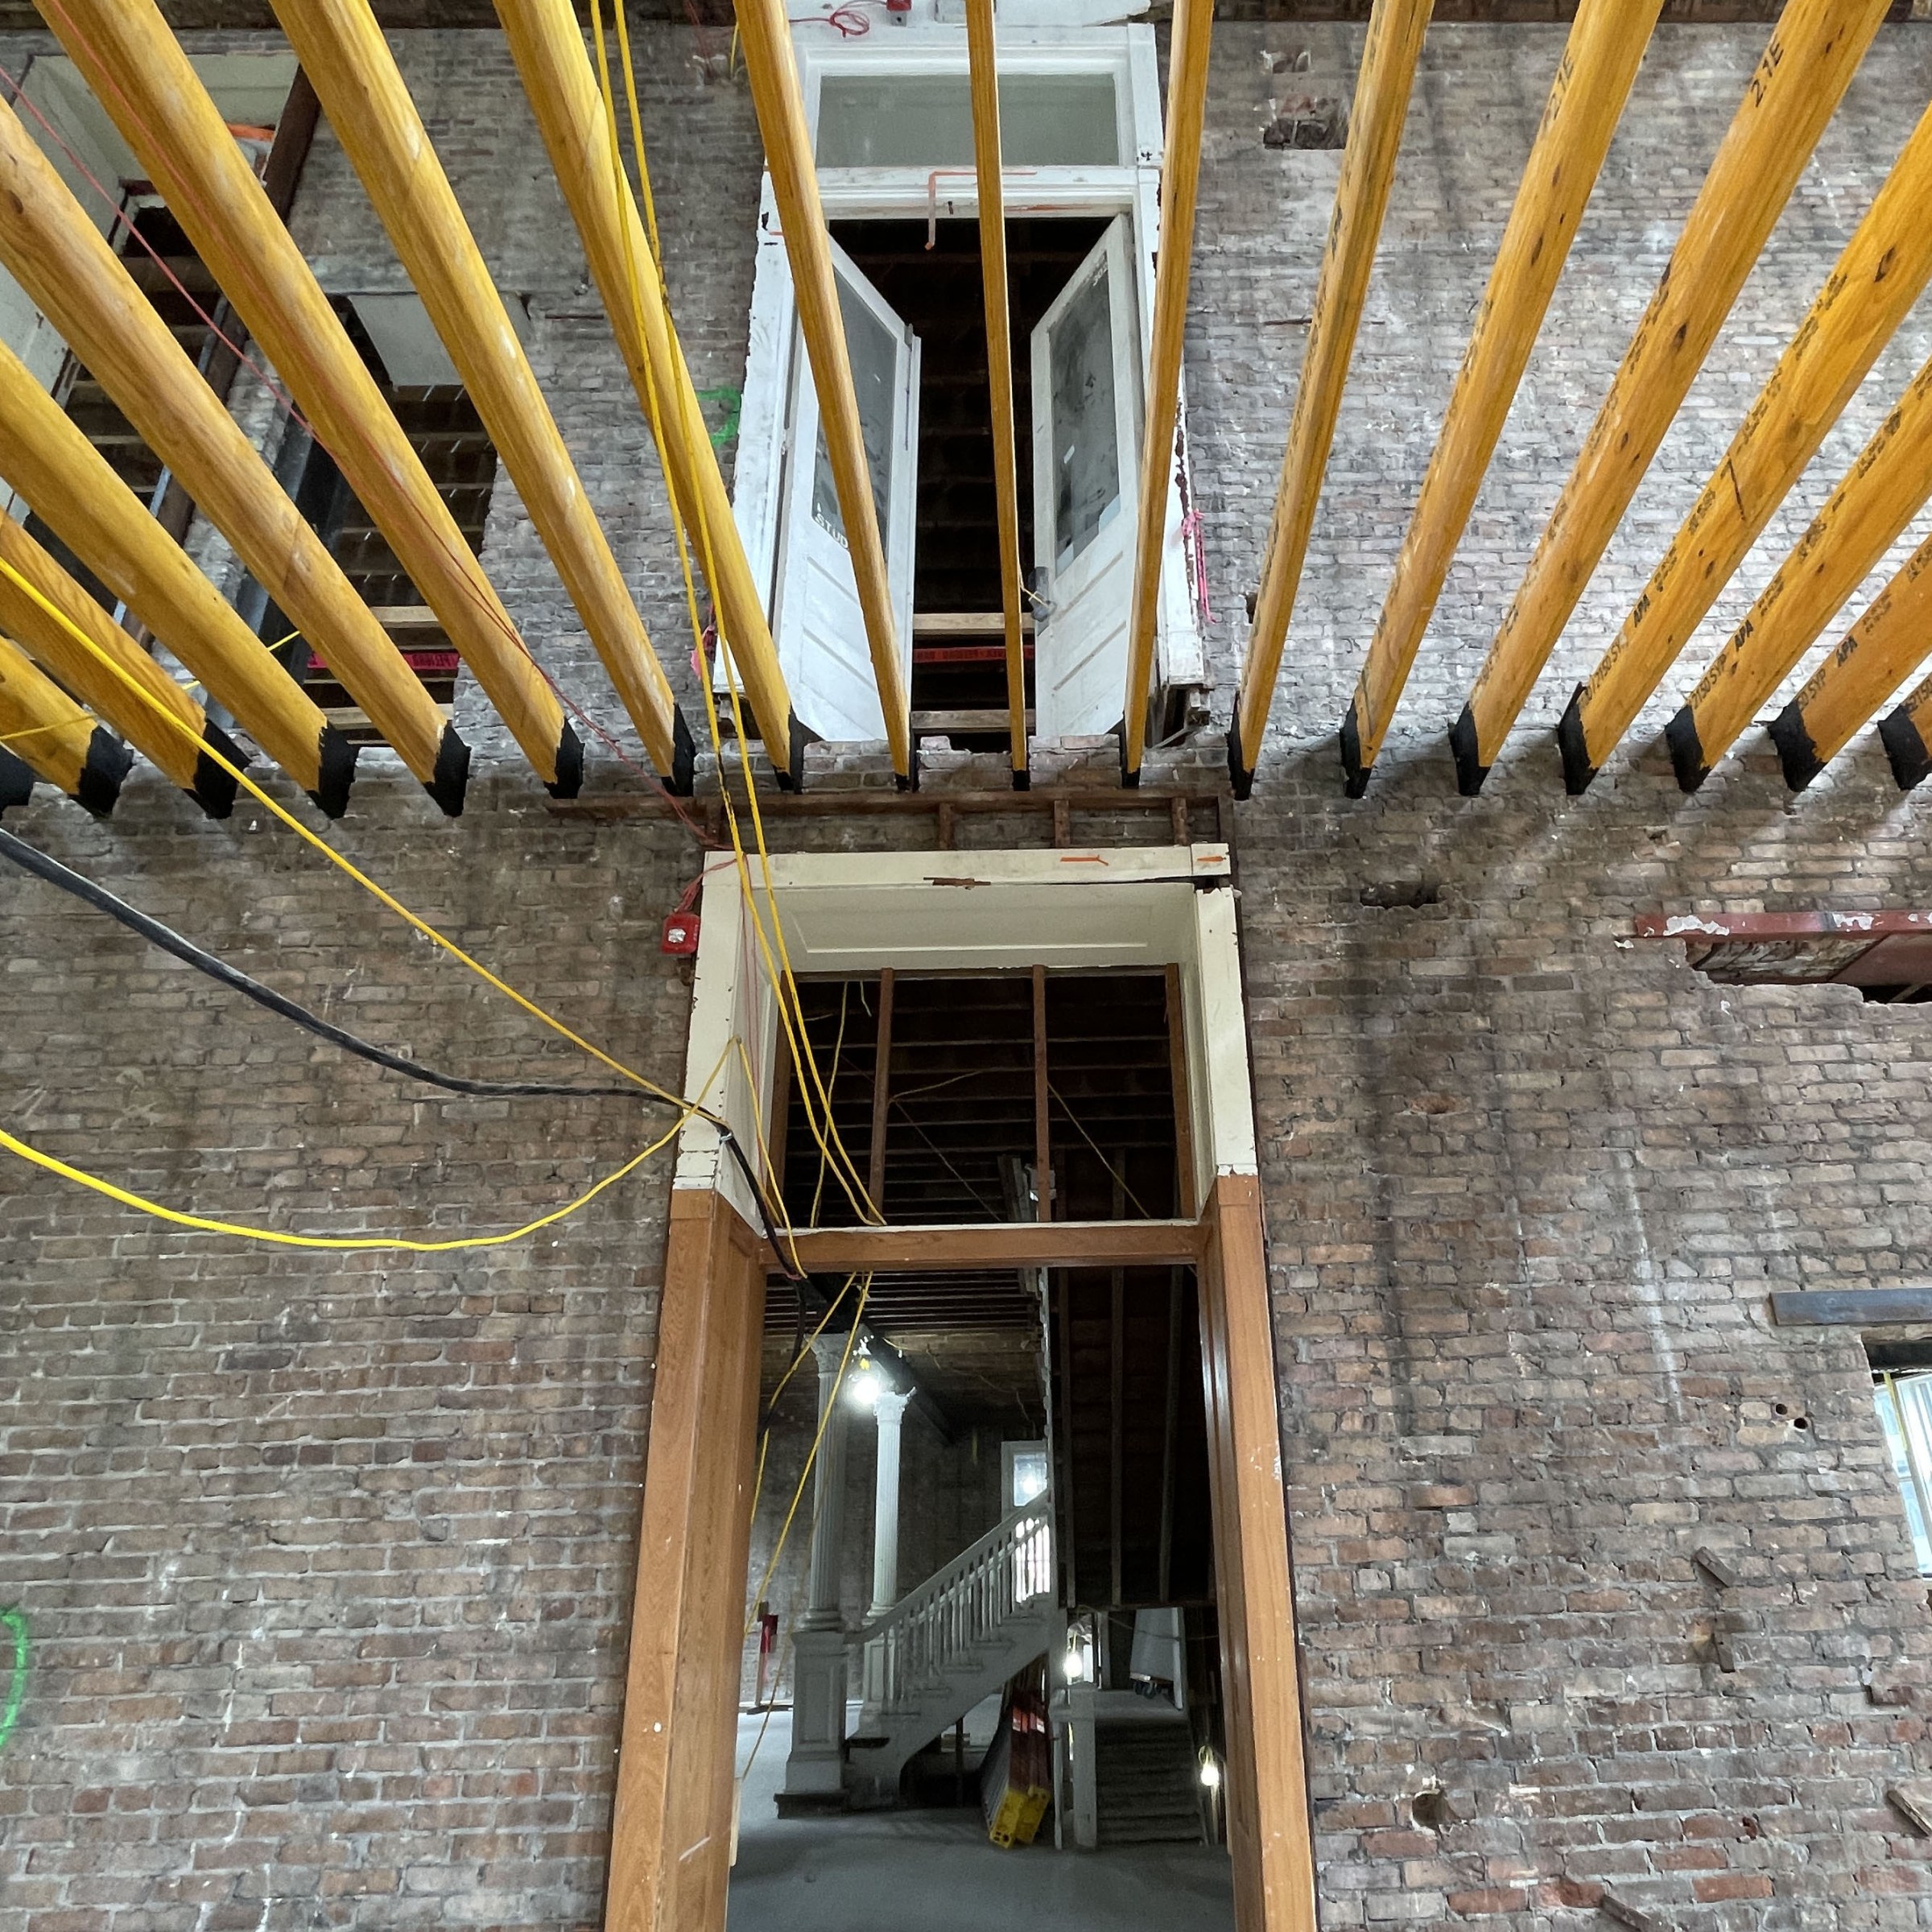 Interior photo of renovation of historic building, looking at a doorway and above at exposed floor beams above the doorway